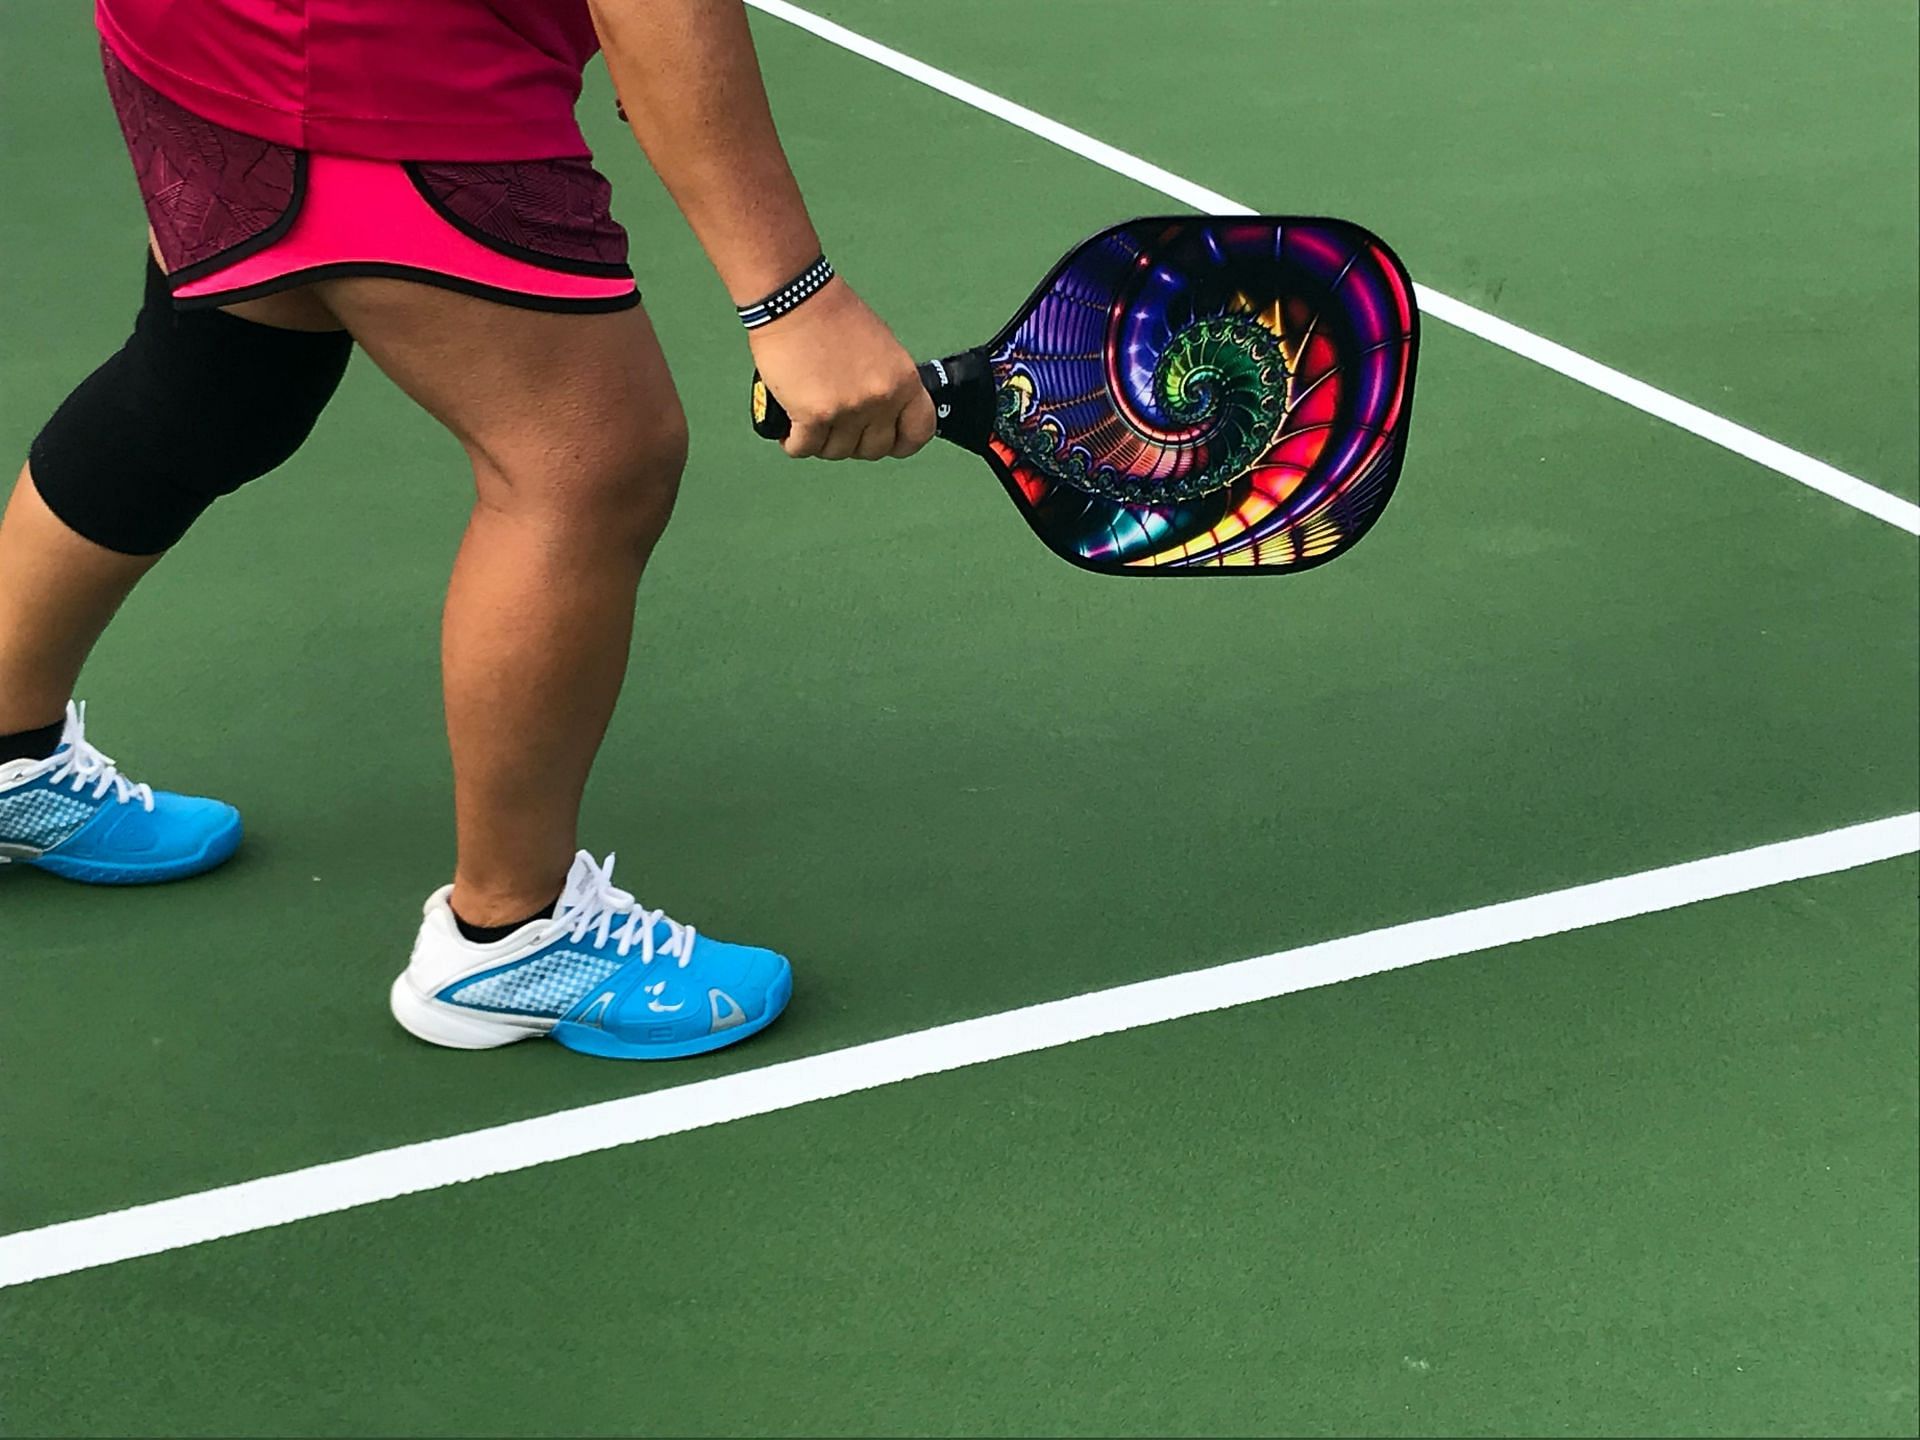 You need some special exercises to help you get better at pickleball! (Image via Unsplash/Joan Azeka)